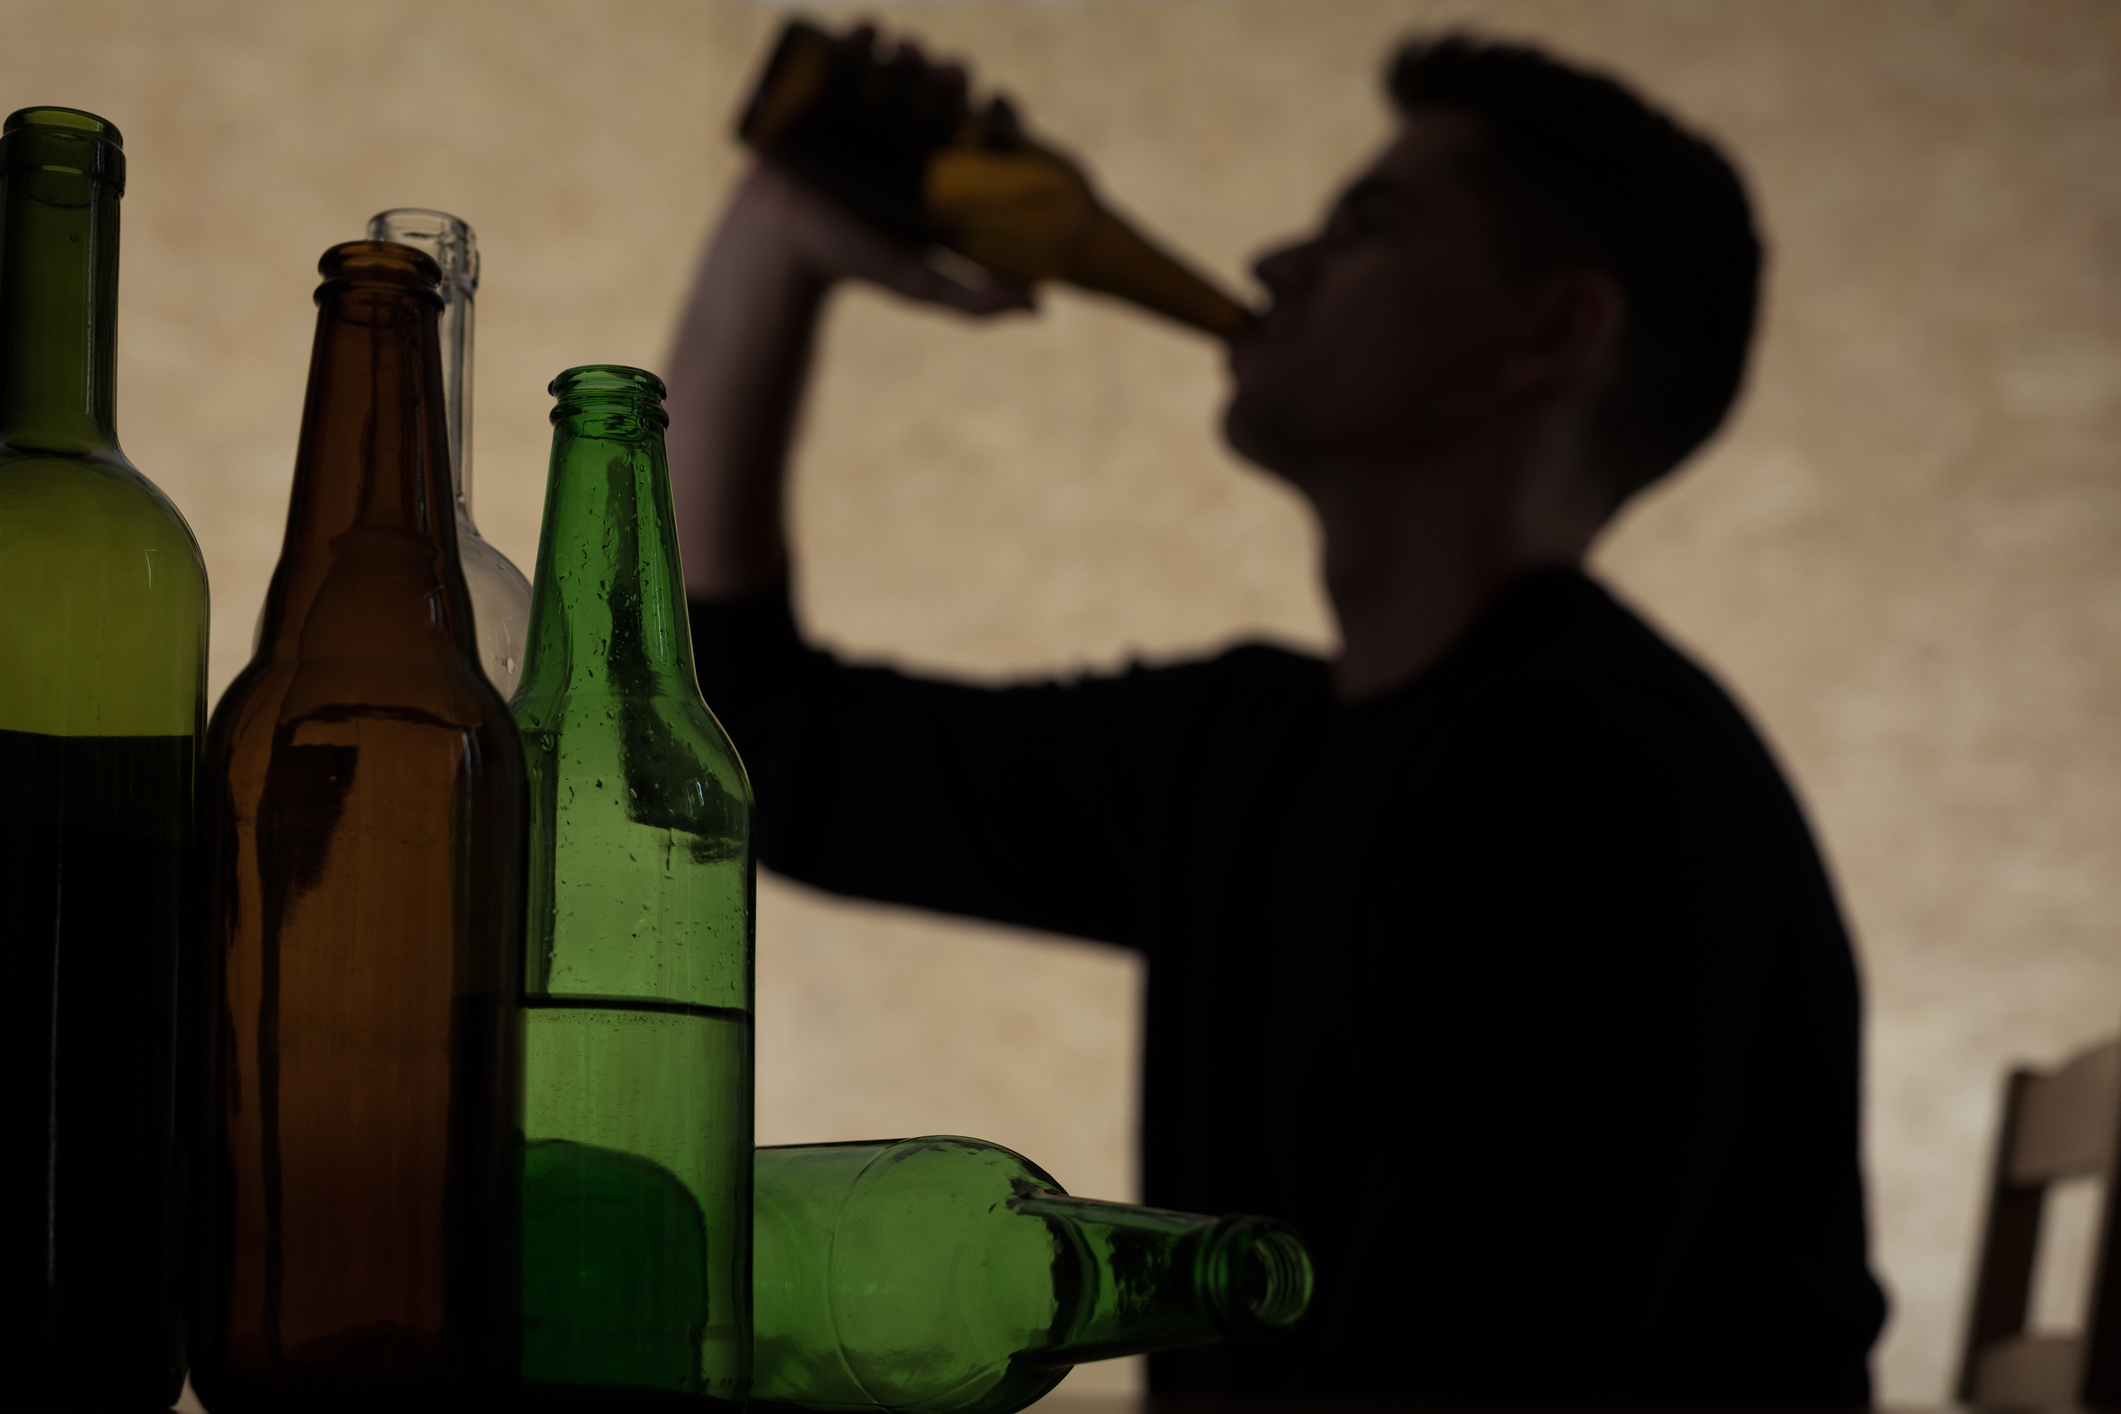 UConn Health researcher Thomas Babor led a global review of youth exposure to alcohol advertising that concludes with a recommendation for statutory controls. (KatarzynaBialasiewicz/Getty Images)